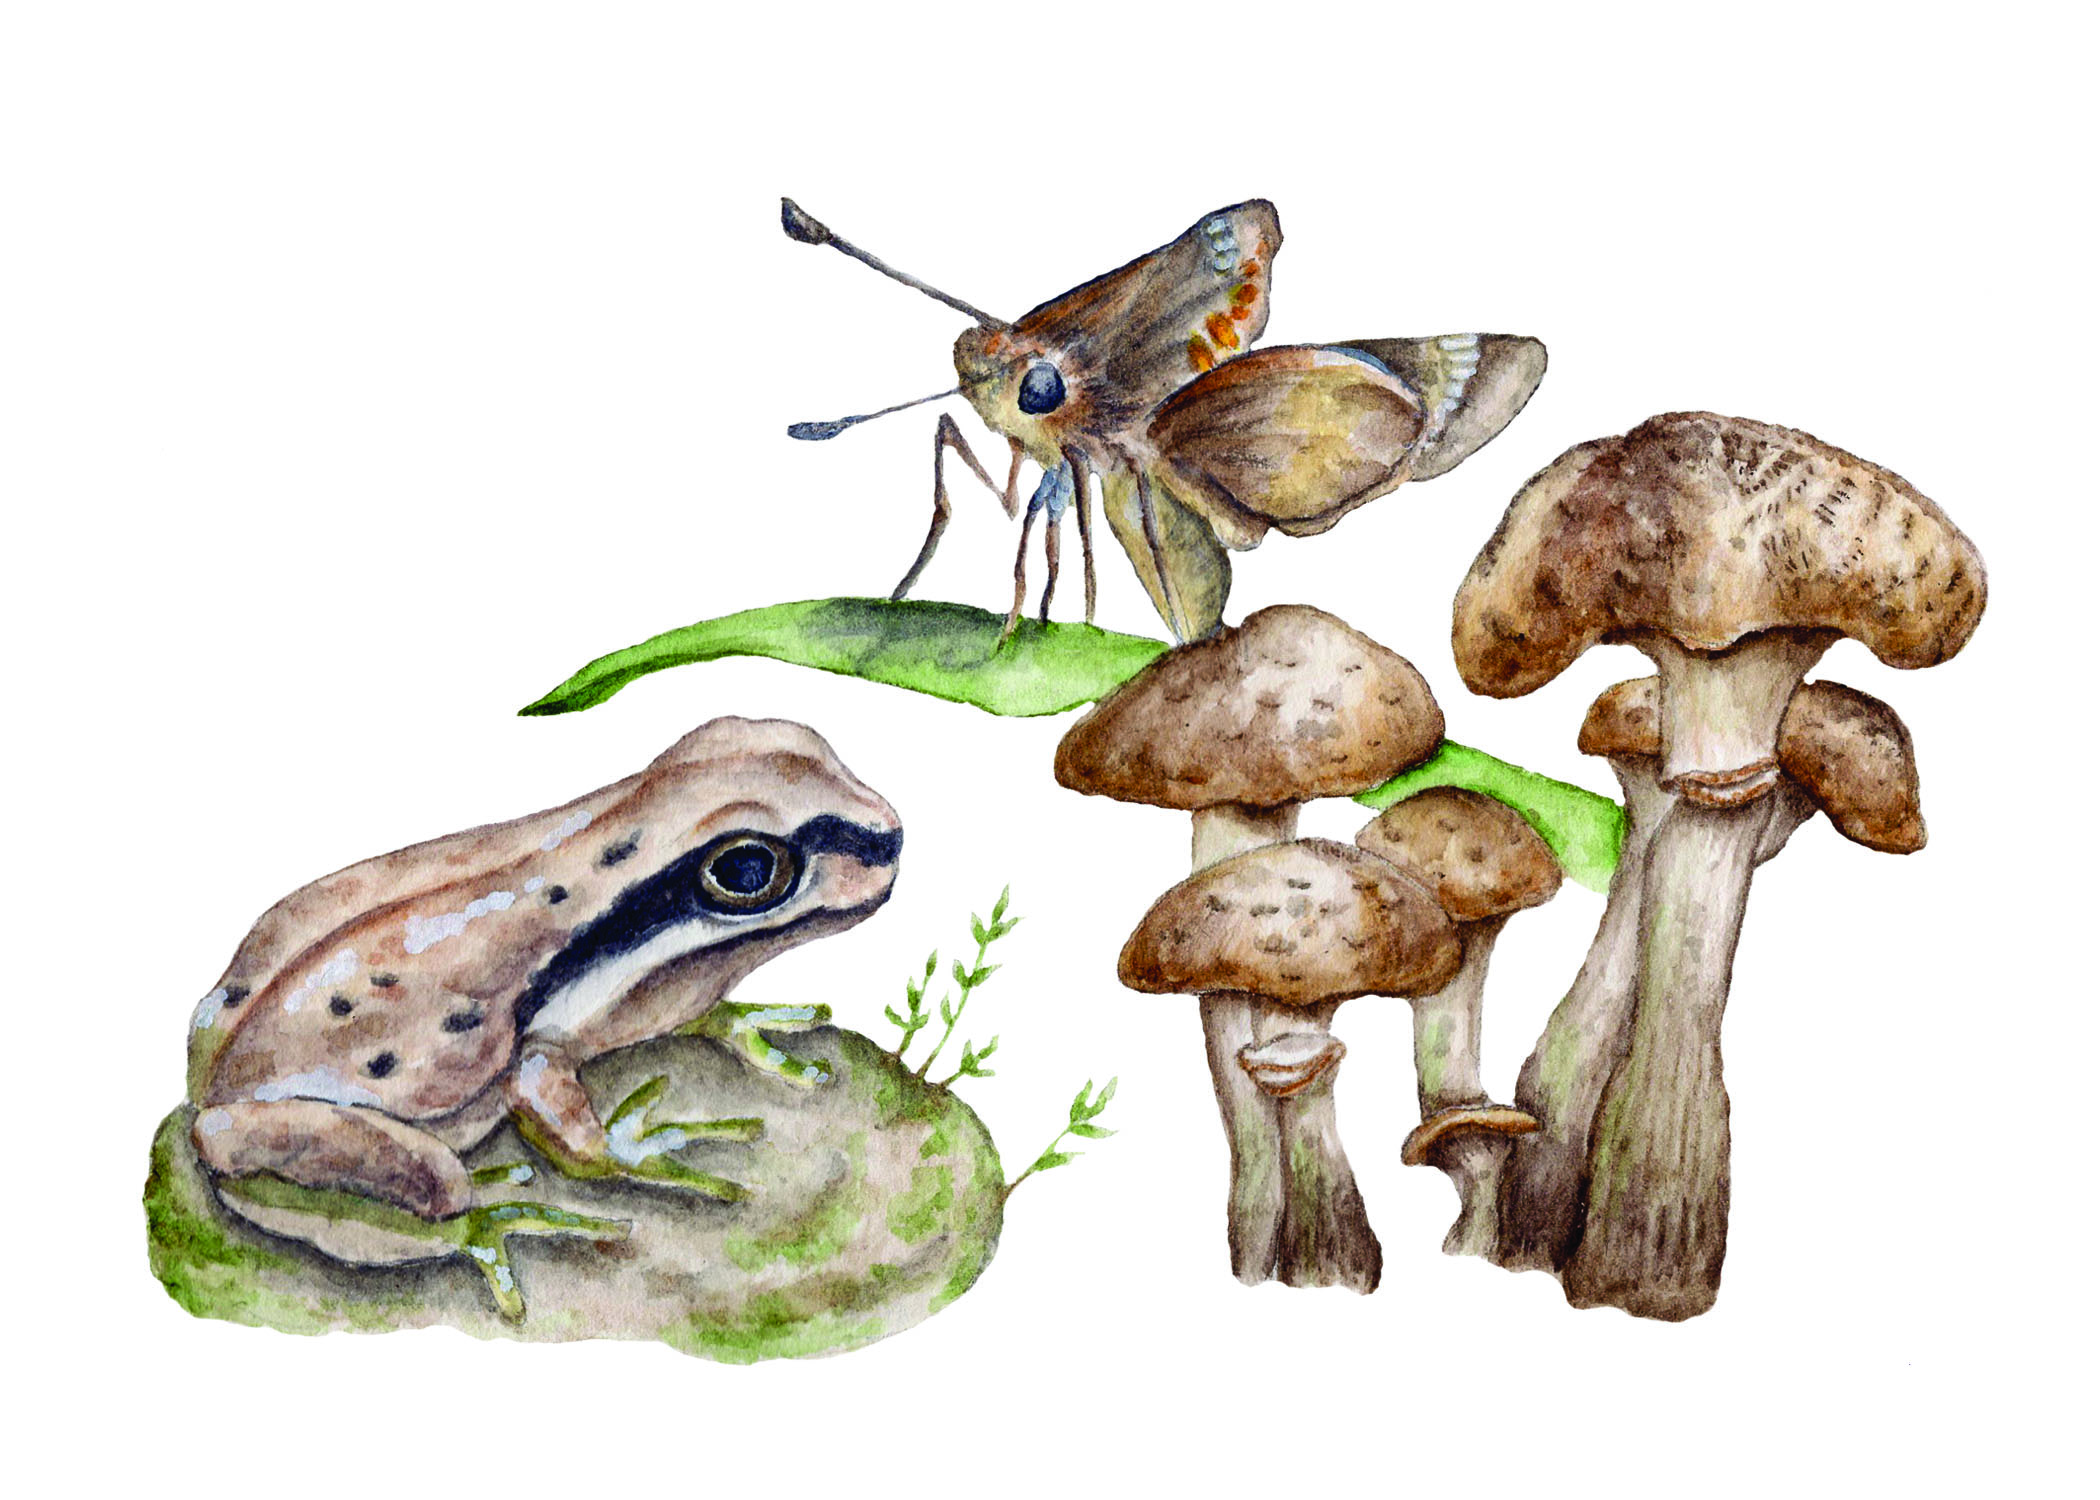 Frog with Skipper and Mushrooms